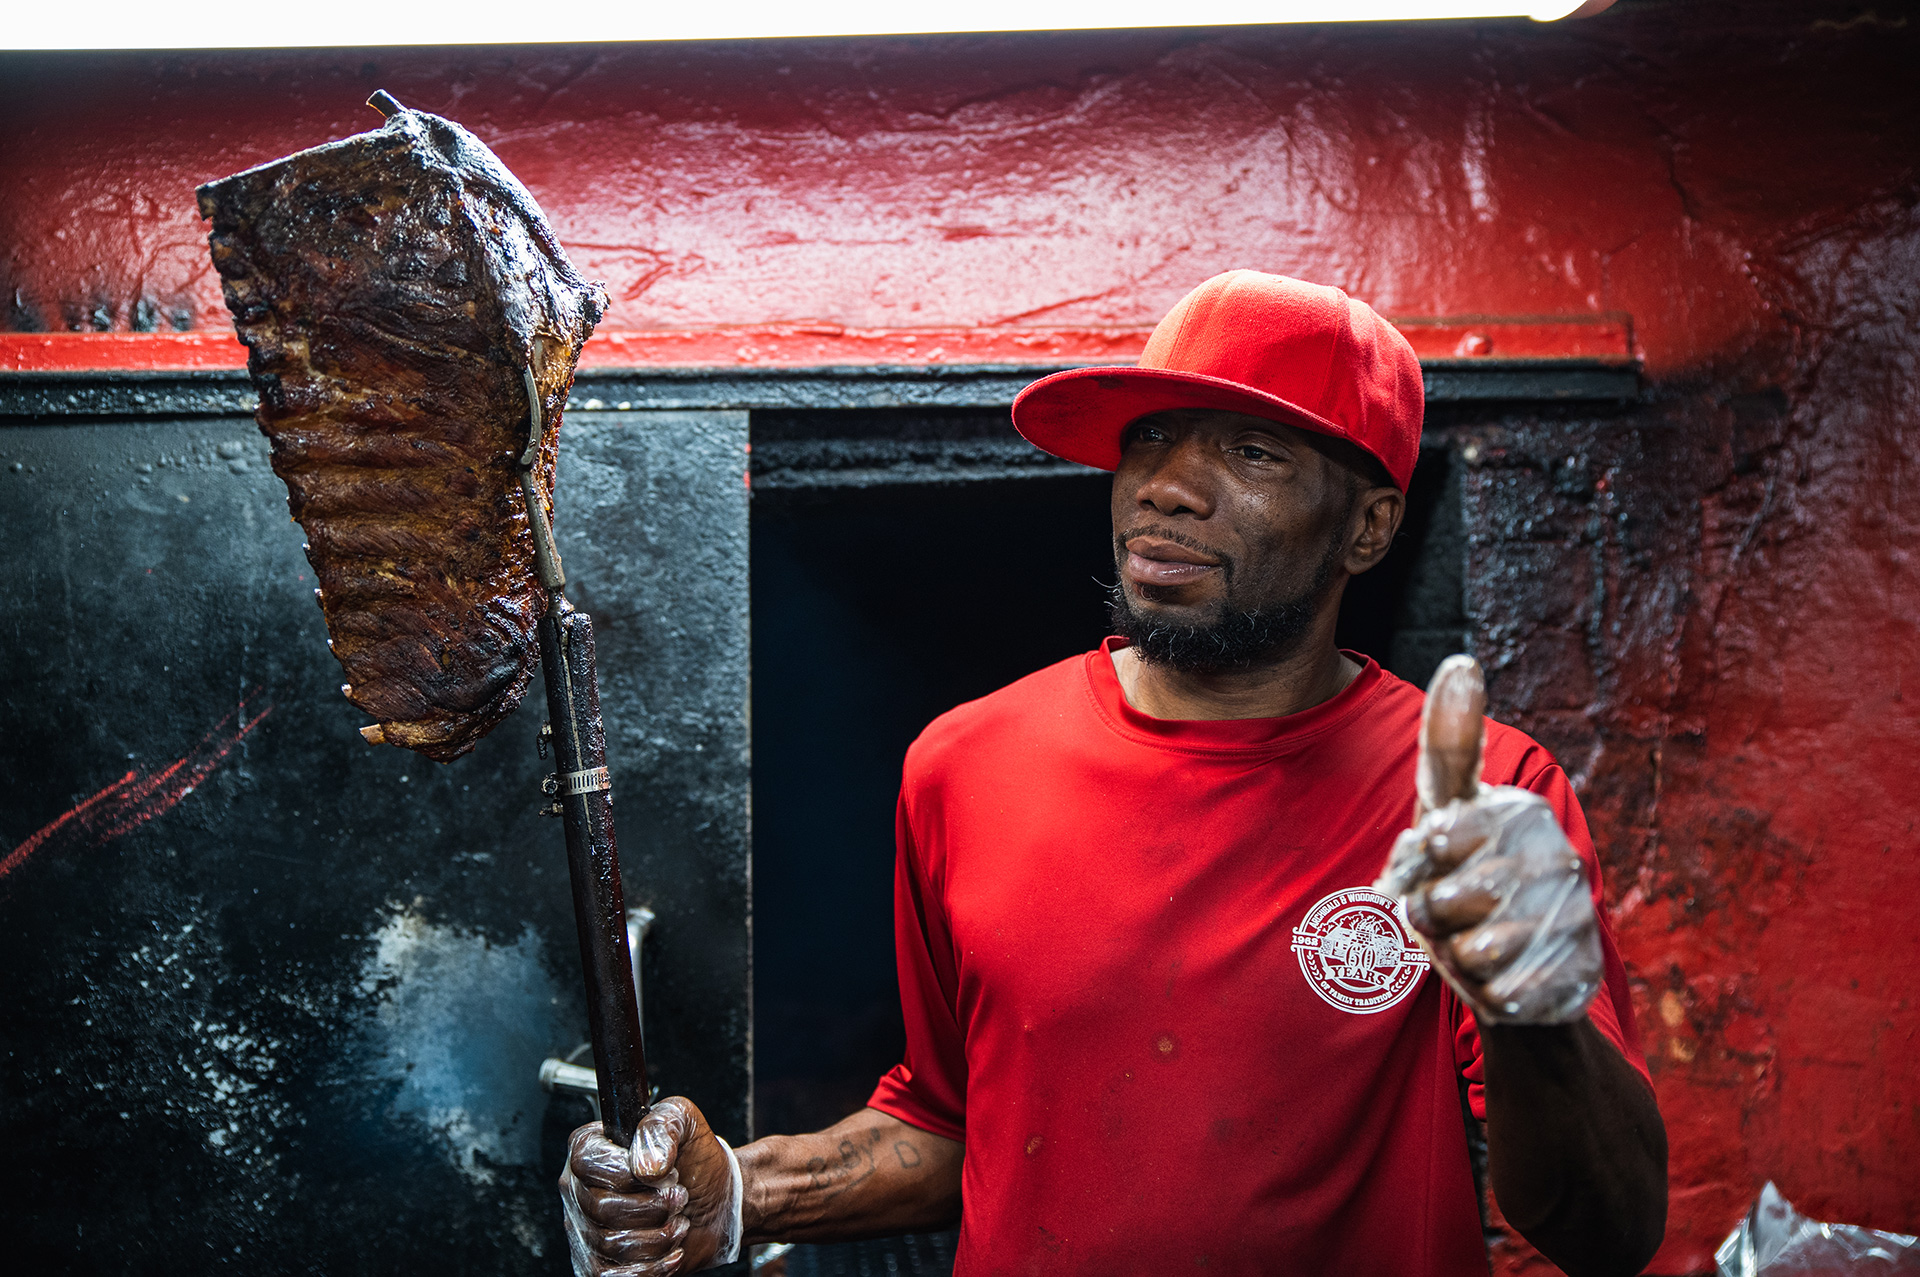 Deondre Richardson poses with a hickory smoked rack of ribs held with a homemade turning fork attached to a hoe handle.